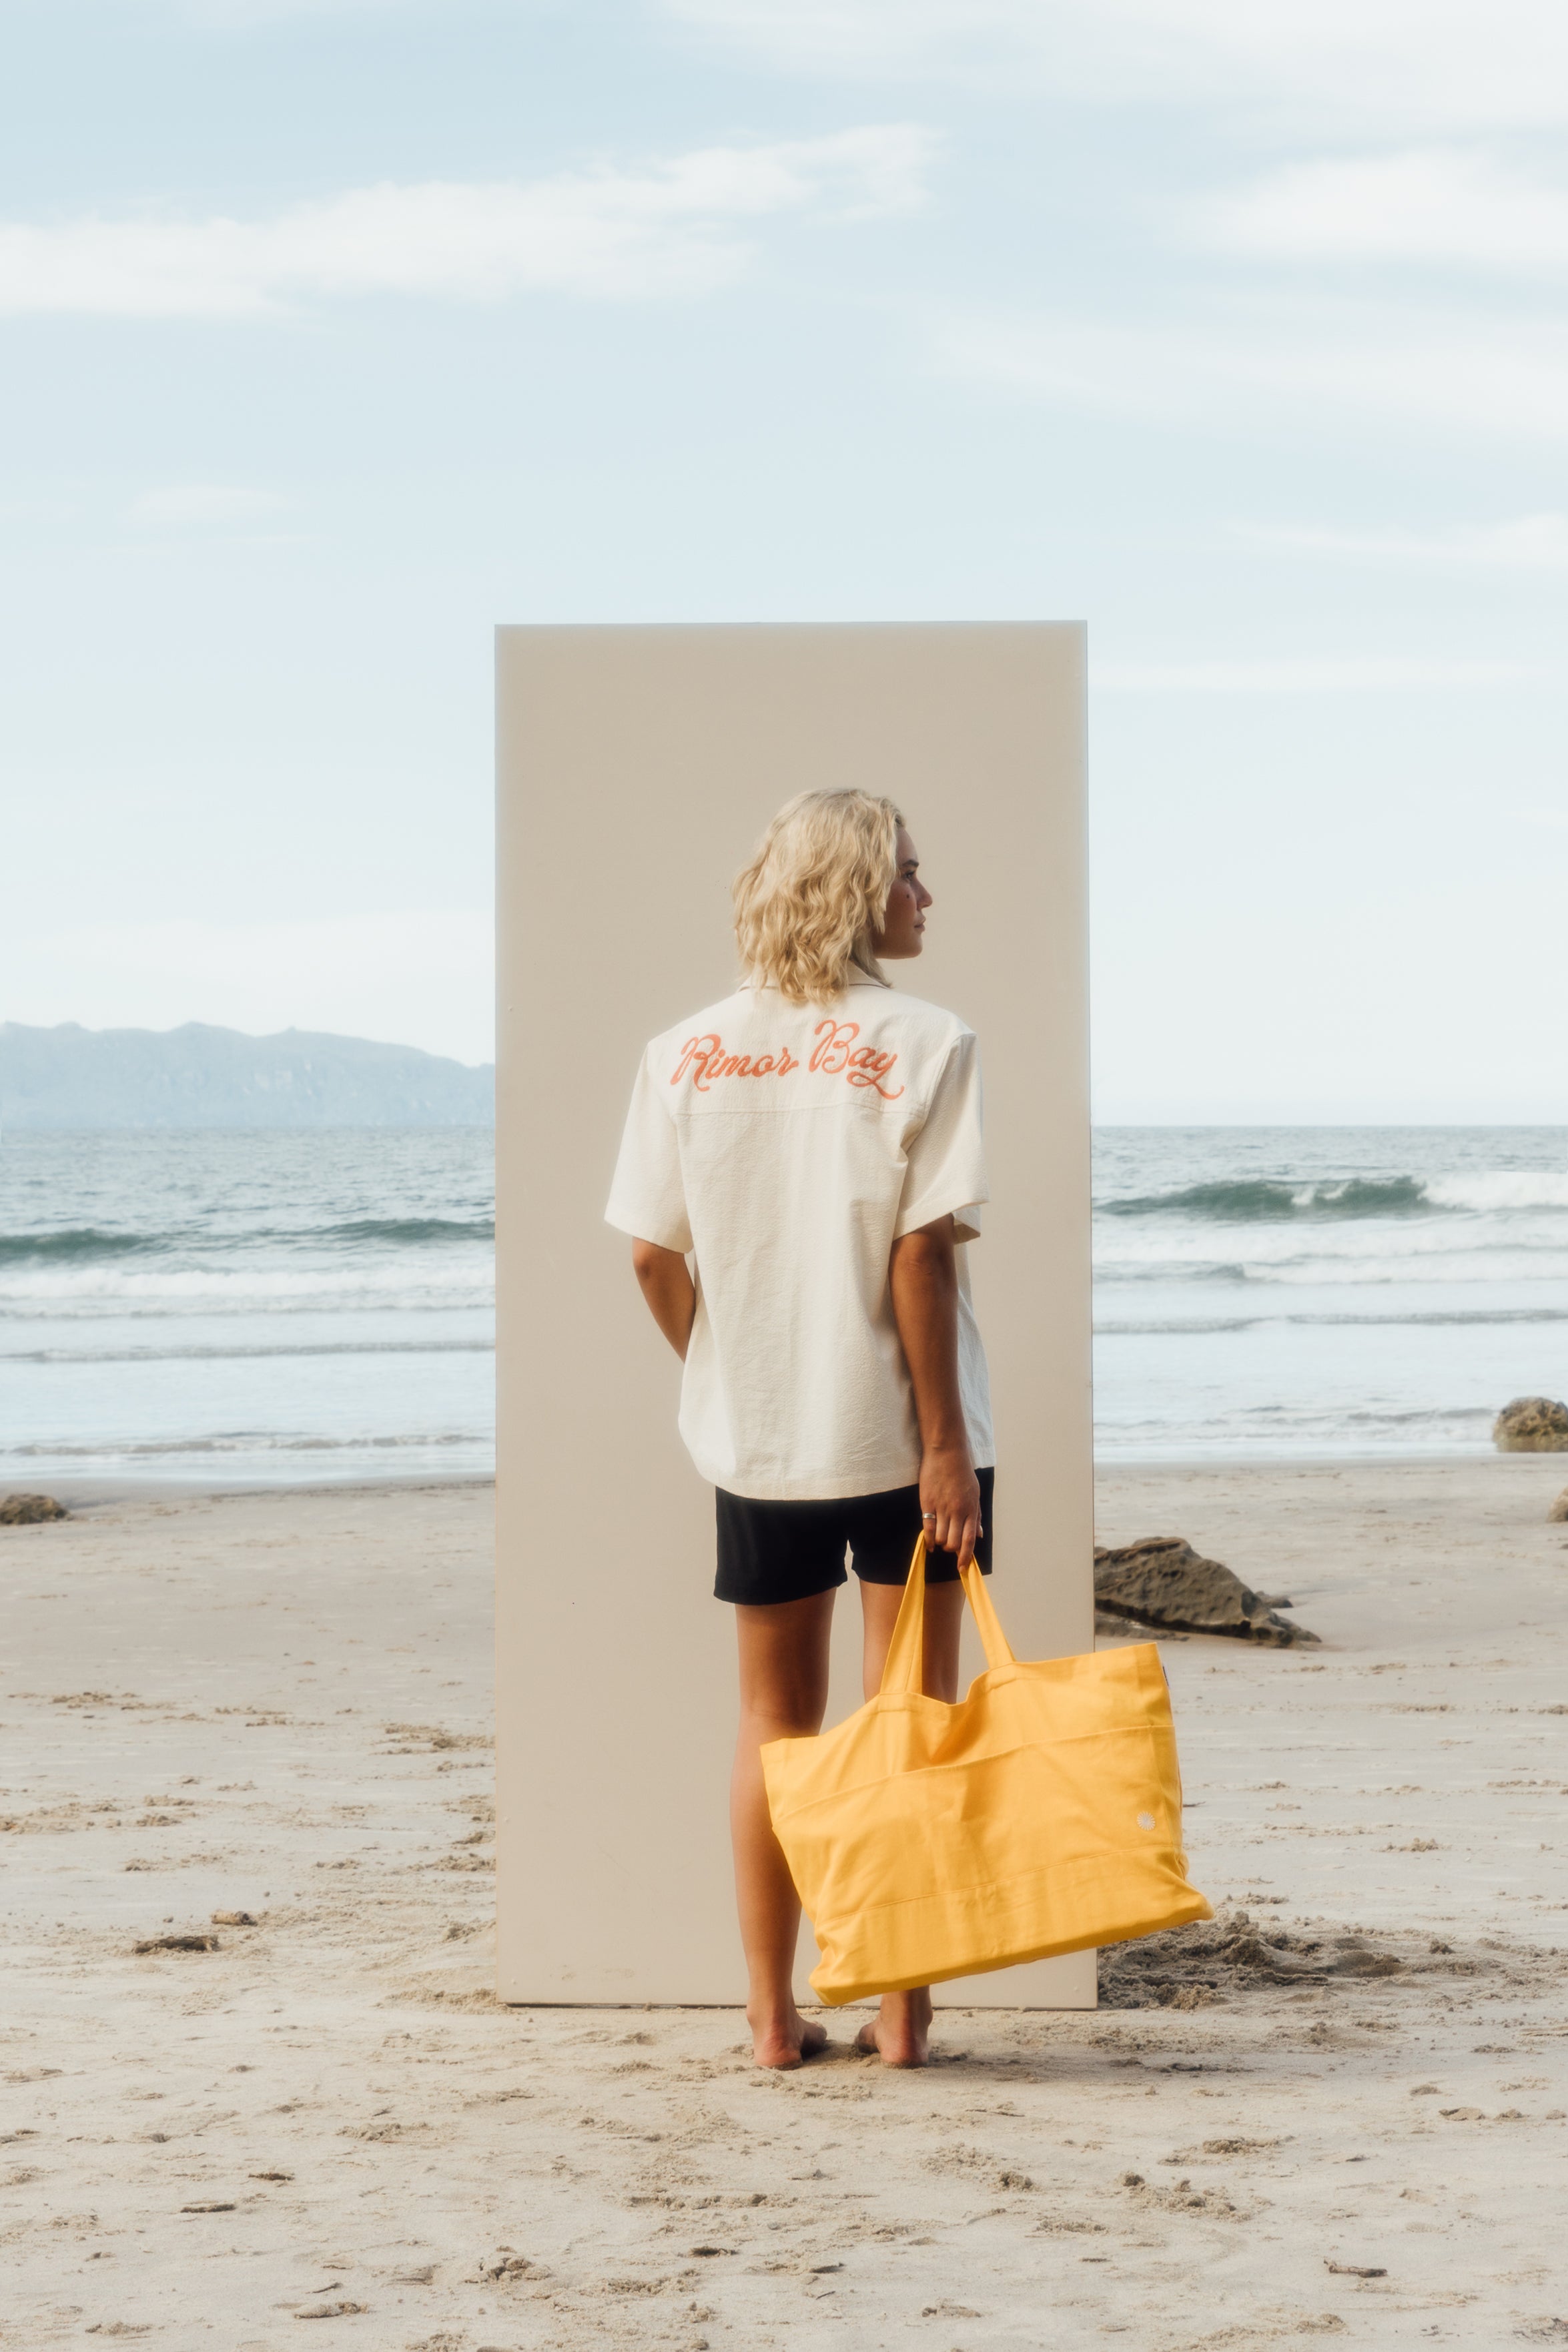 girl standing on beach in front of beige board wearing beige shirt, black shorts, holding yellow beach bag